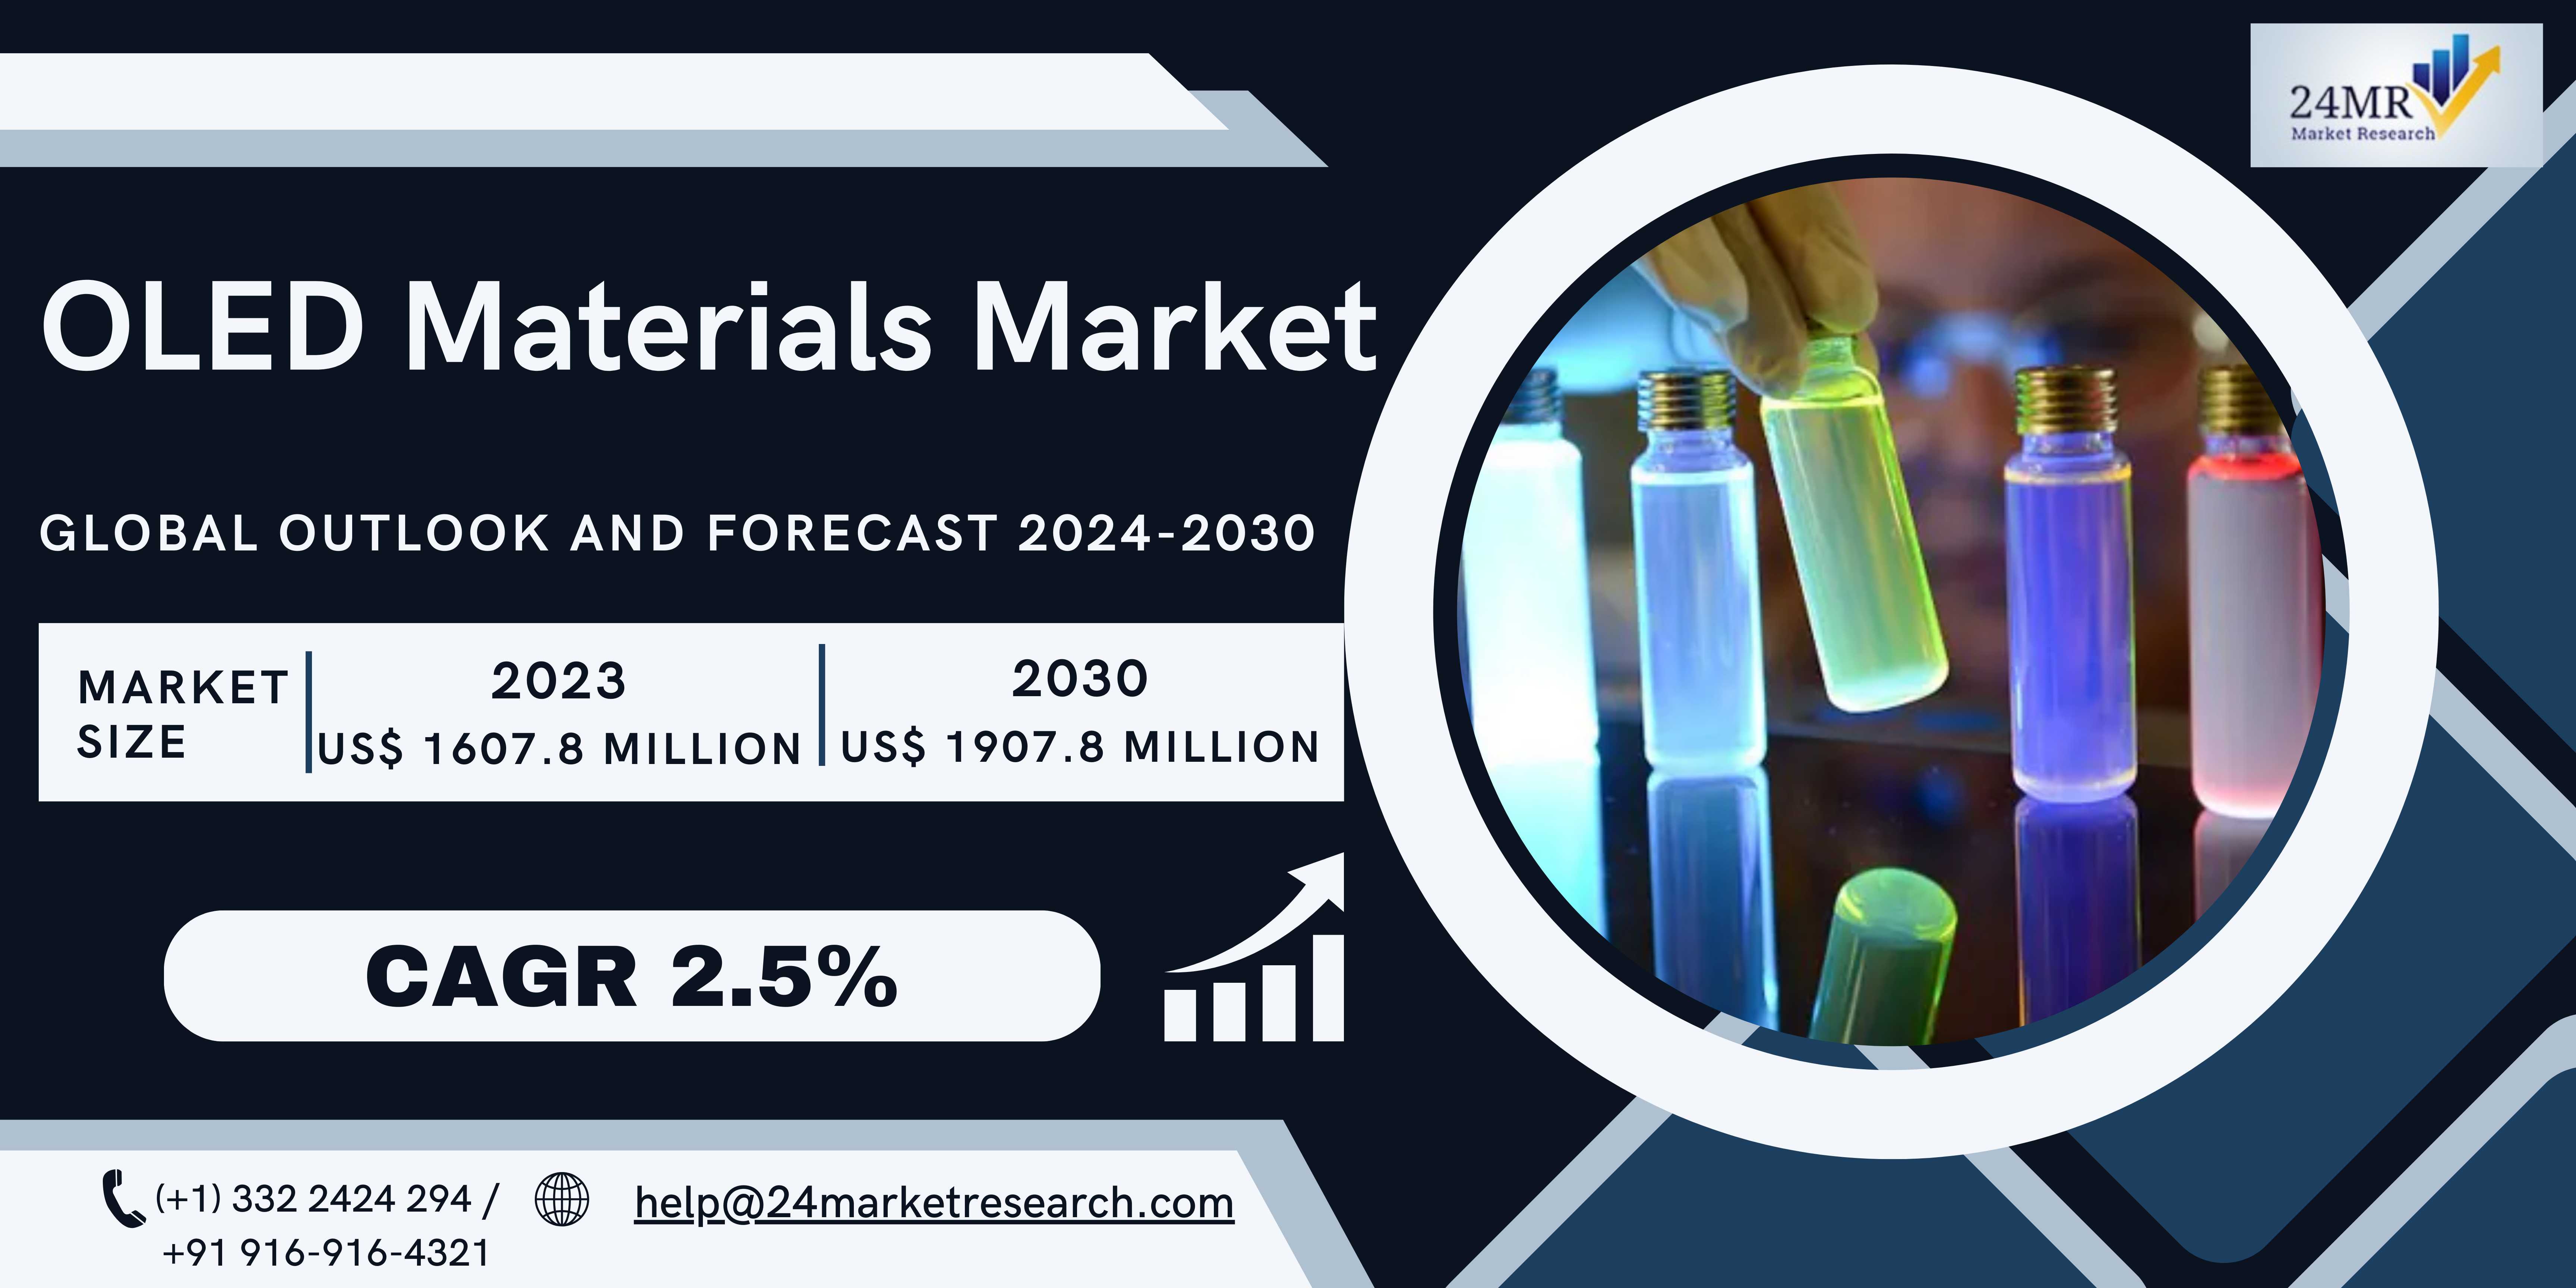 OLED Materials Market, Global Outlook and Forecast..